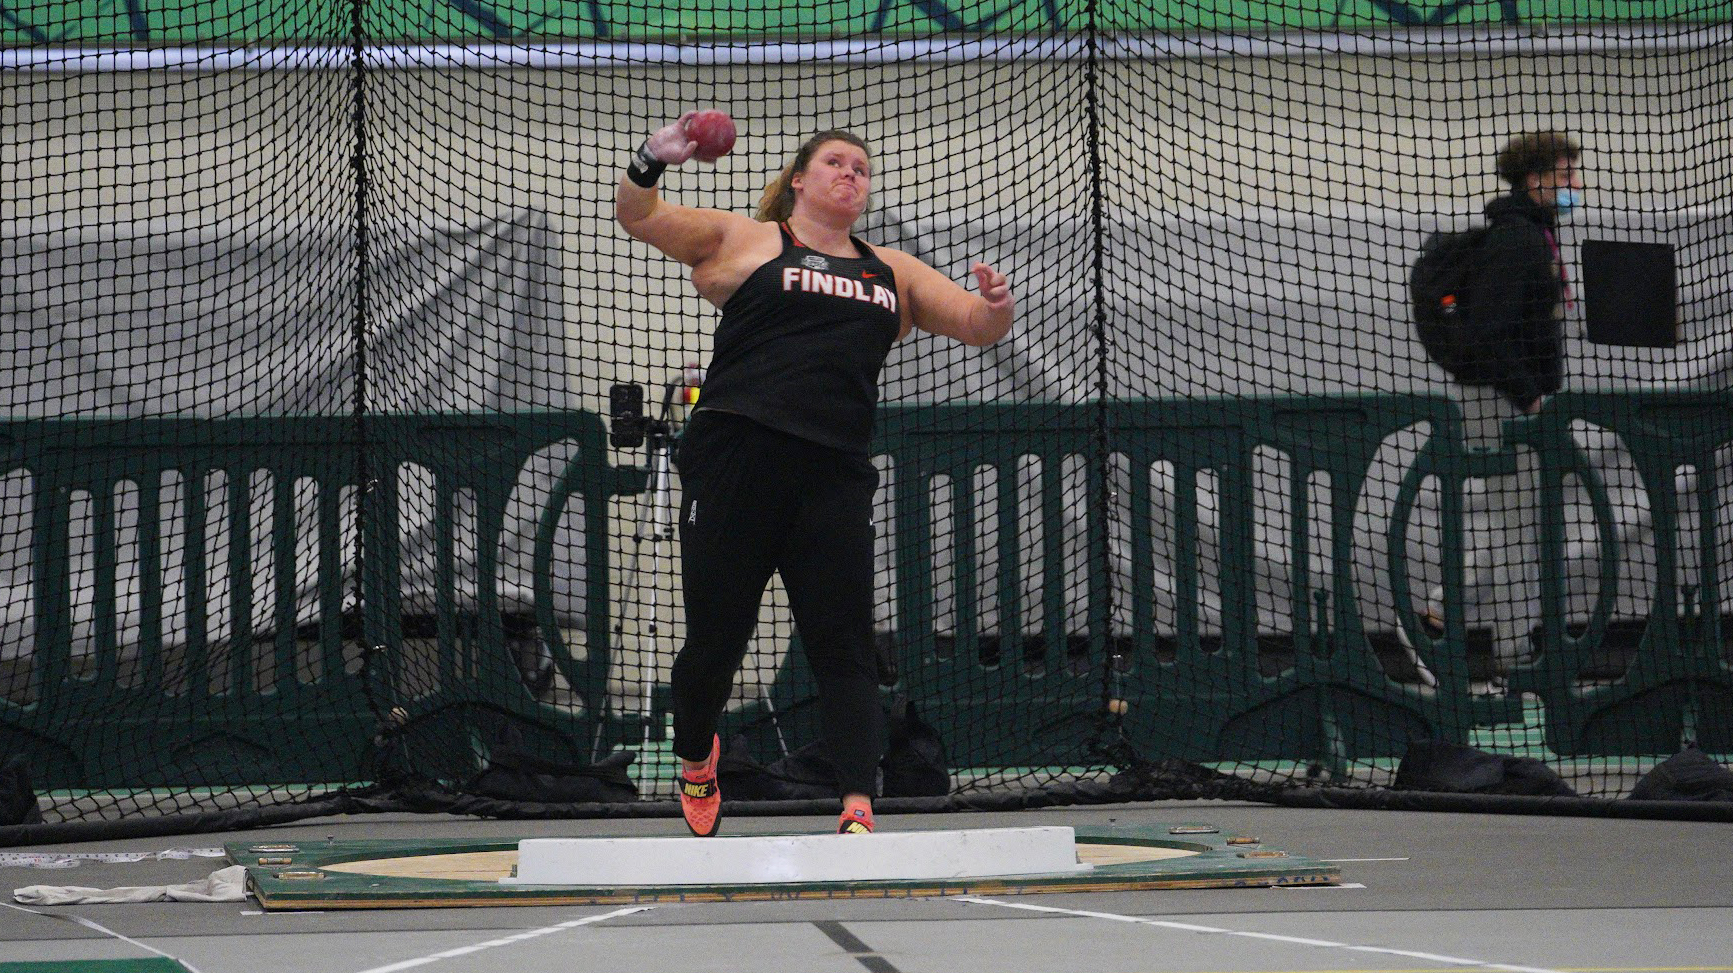 Thrower competes in shot put.